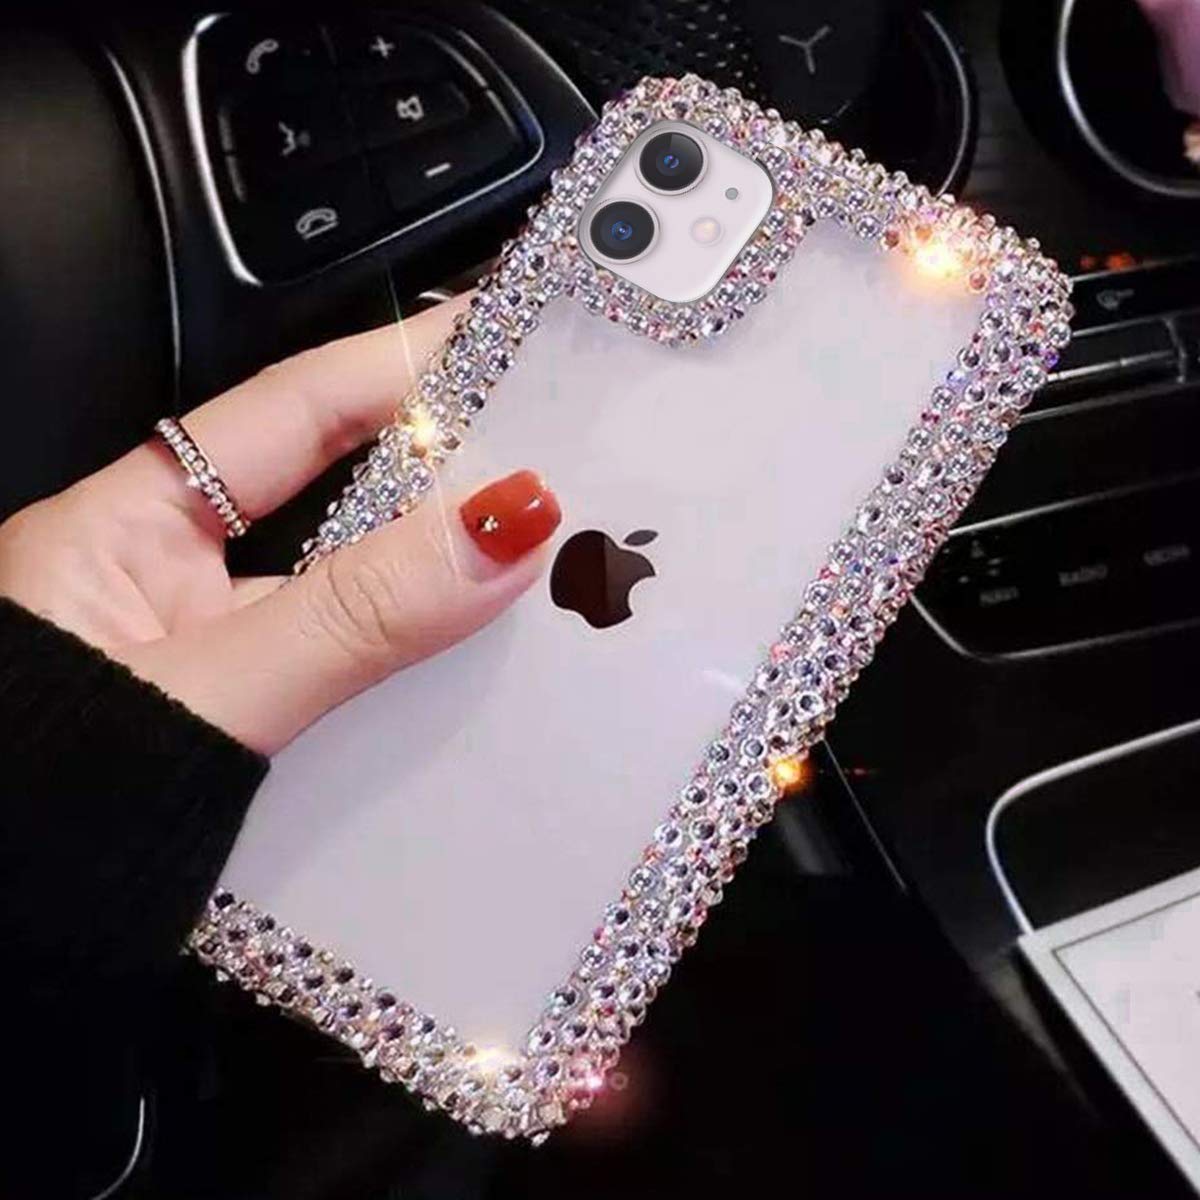 BONITEC Jesiya for iPhone 11, 3D Glitter Sparkle Bling Case Luxury Shiny Crystal Rhinestone Diamond Bumper Clear Protective Cover Clear for Women